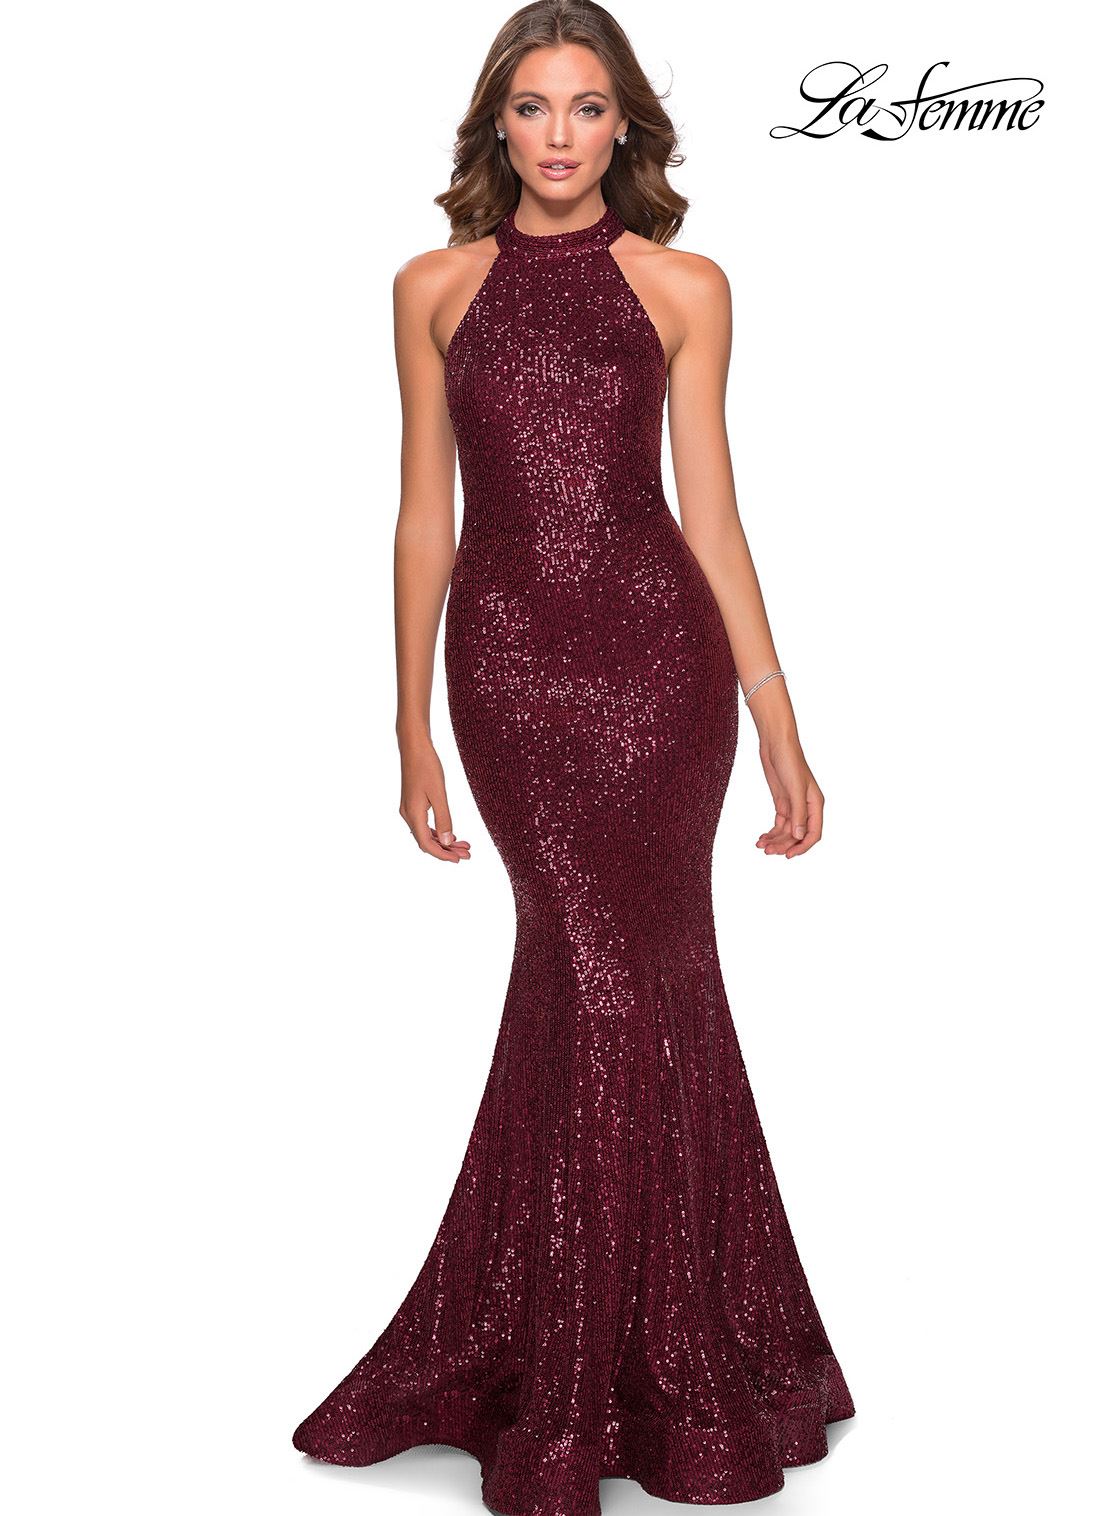 places to buy evening gowns near me